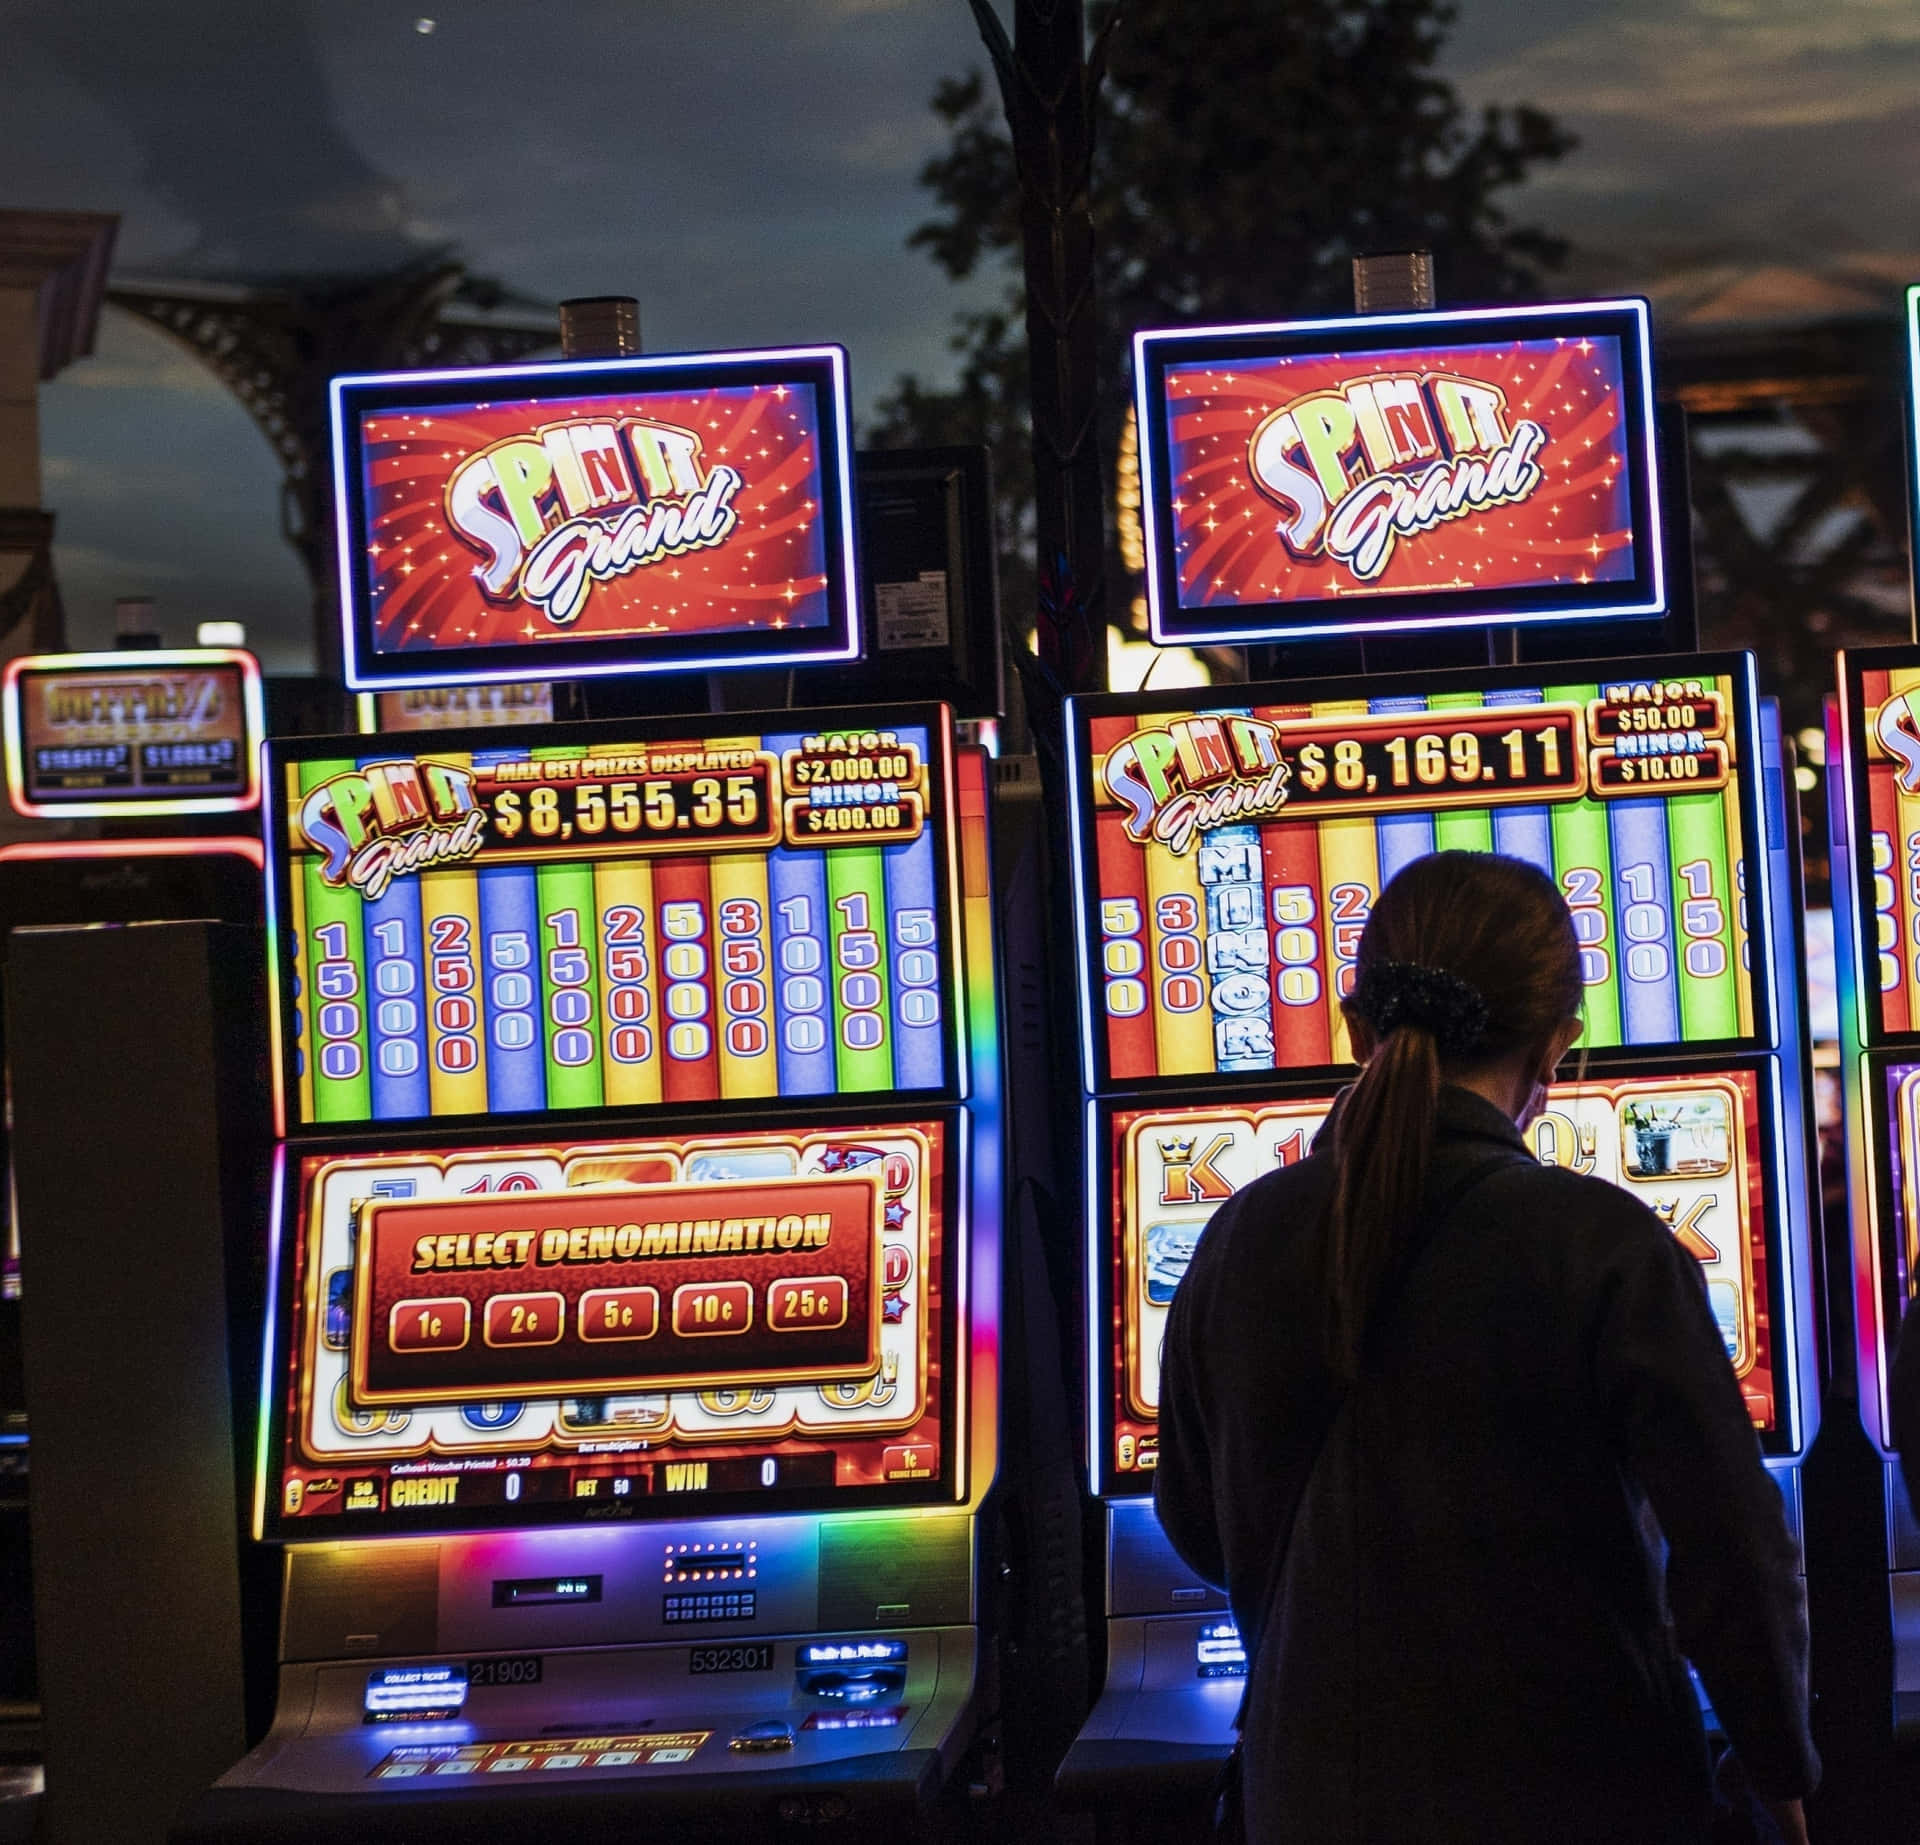 Spend time with friends playing slot machines!